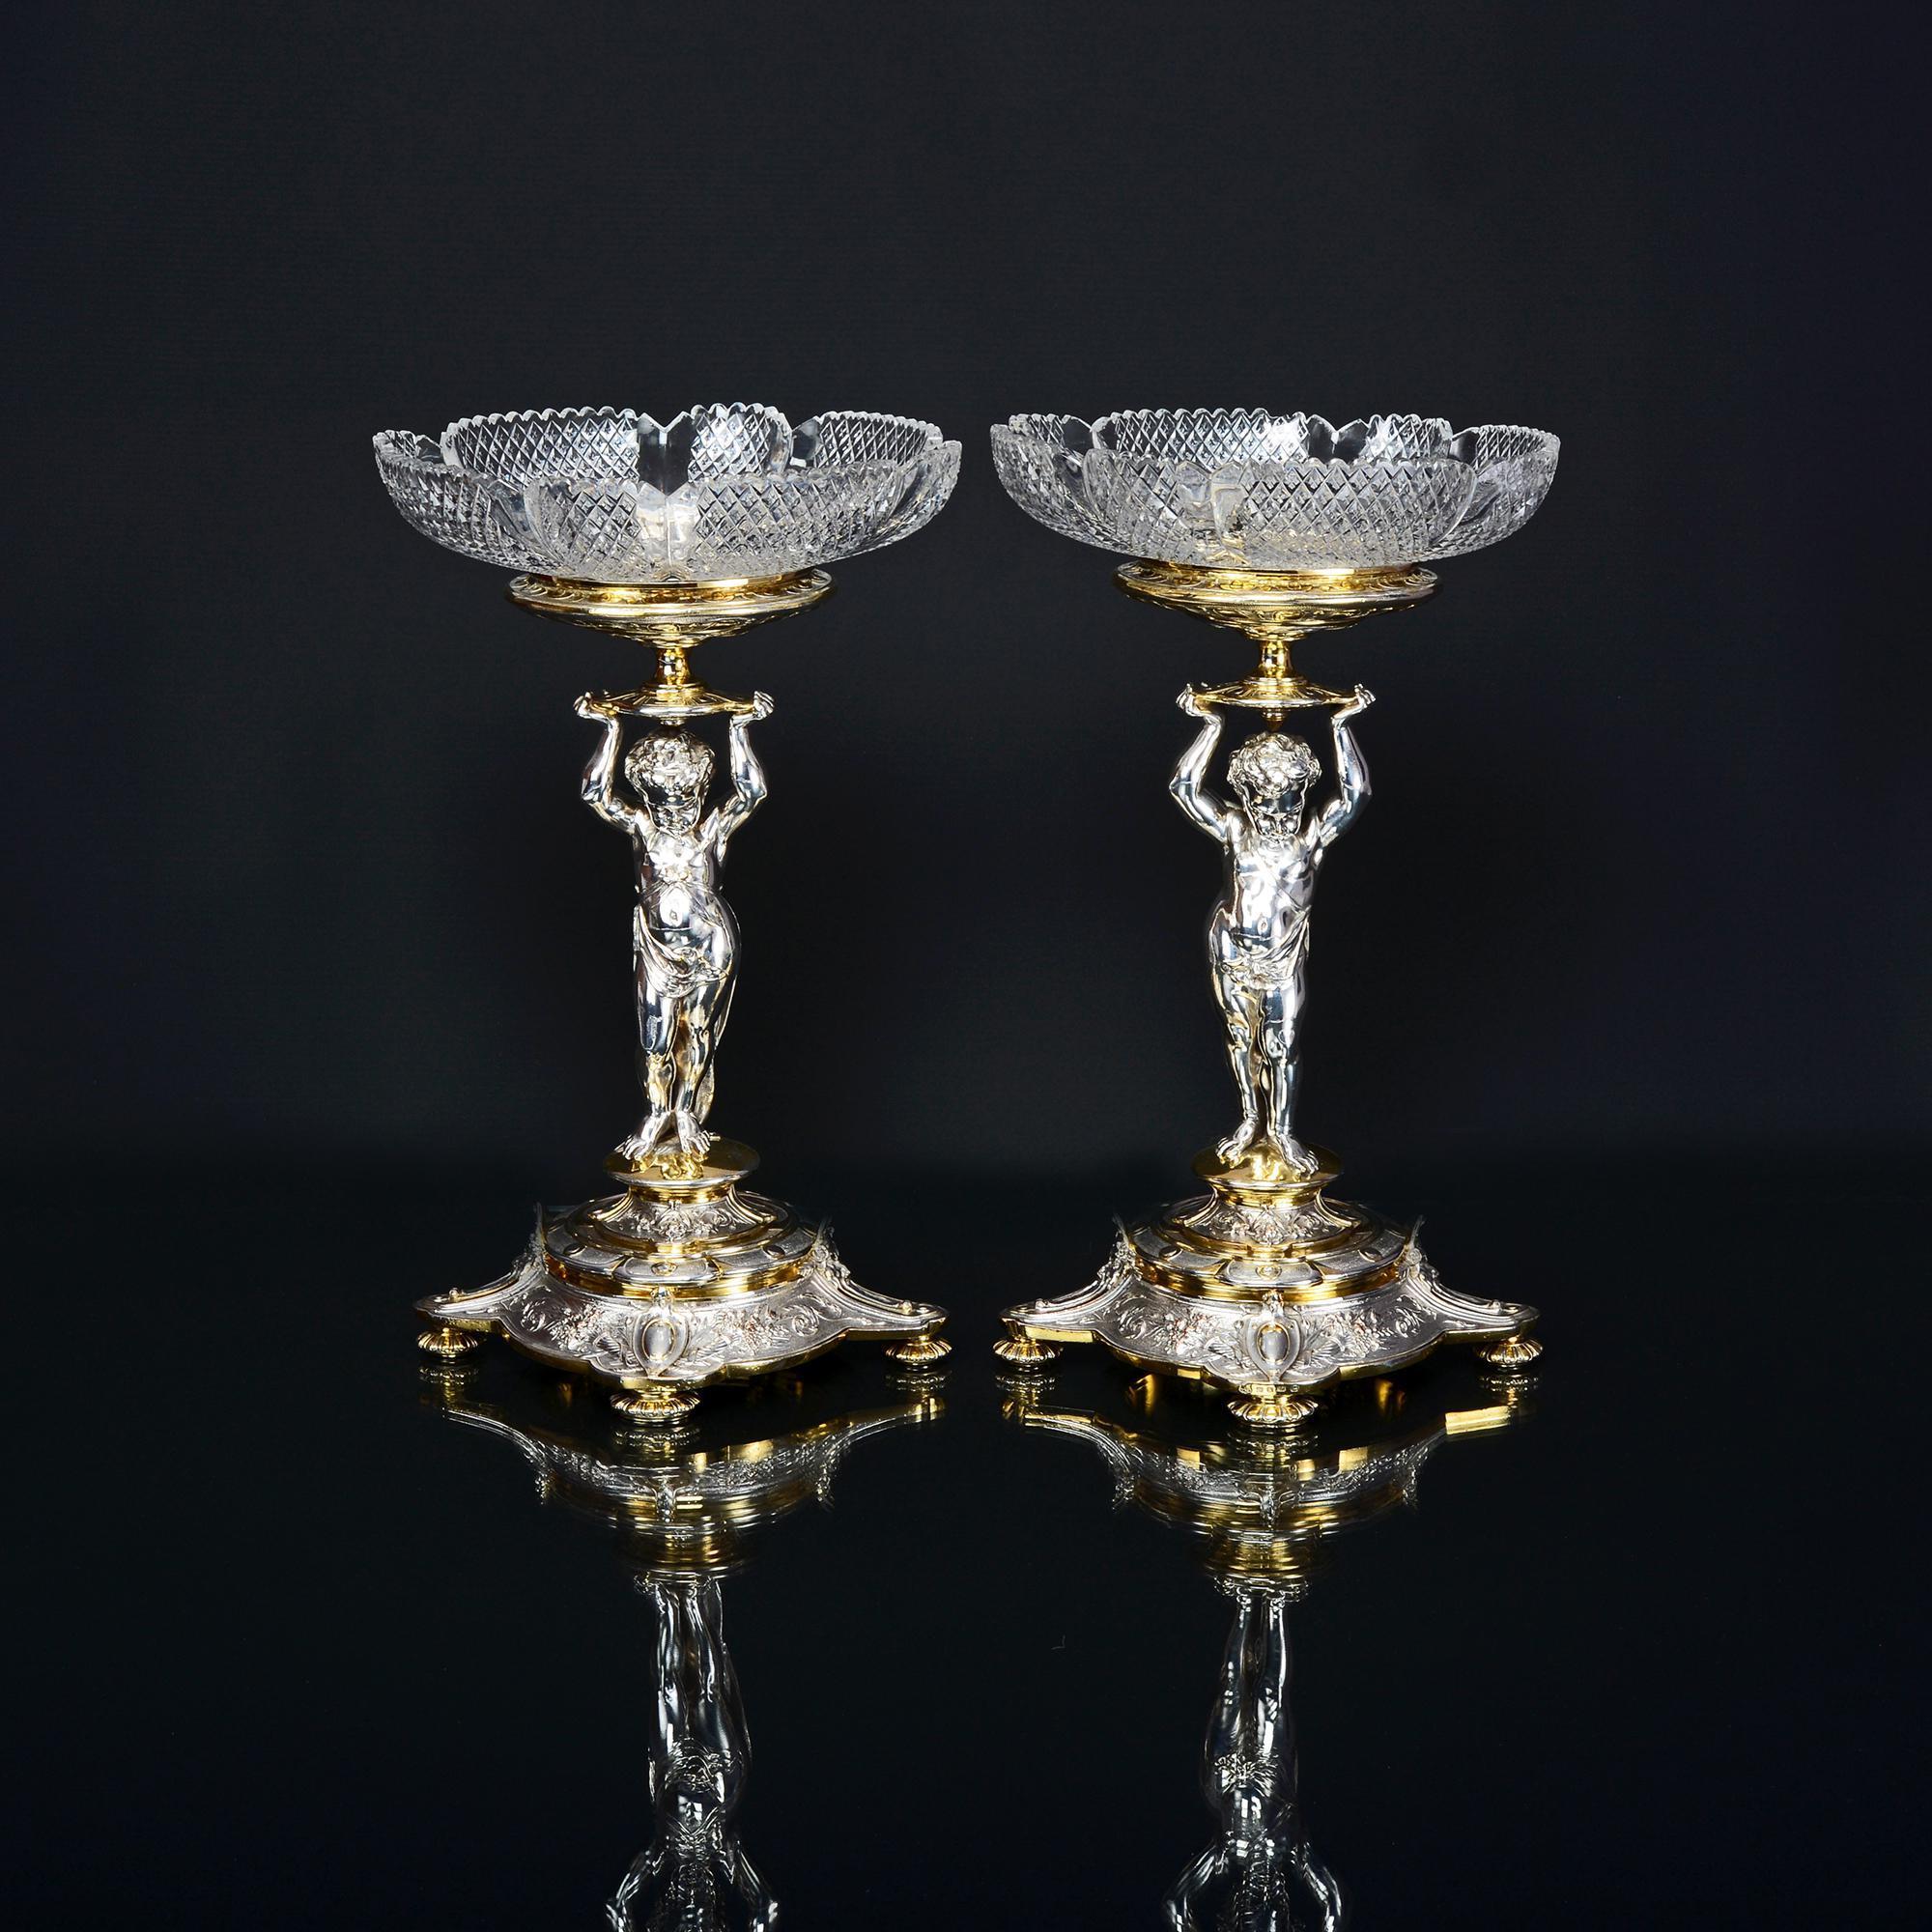 Baroque Silver-Plated and Parcel-Gilt Candelabra and Comport Suite